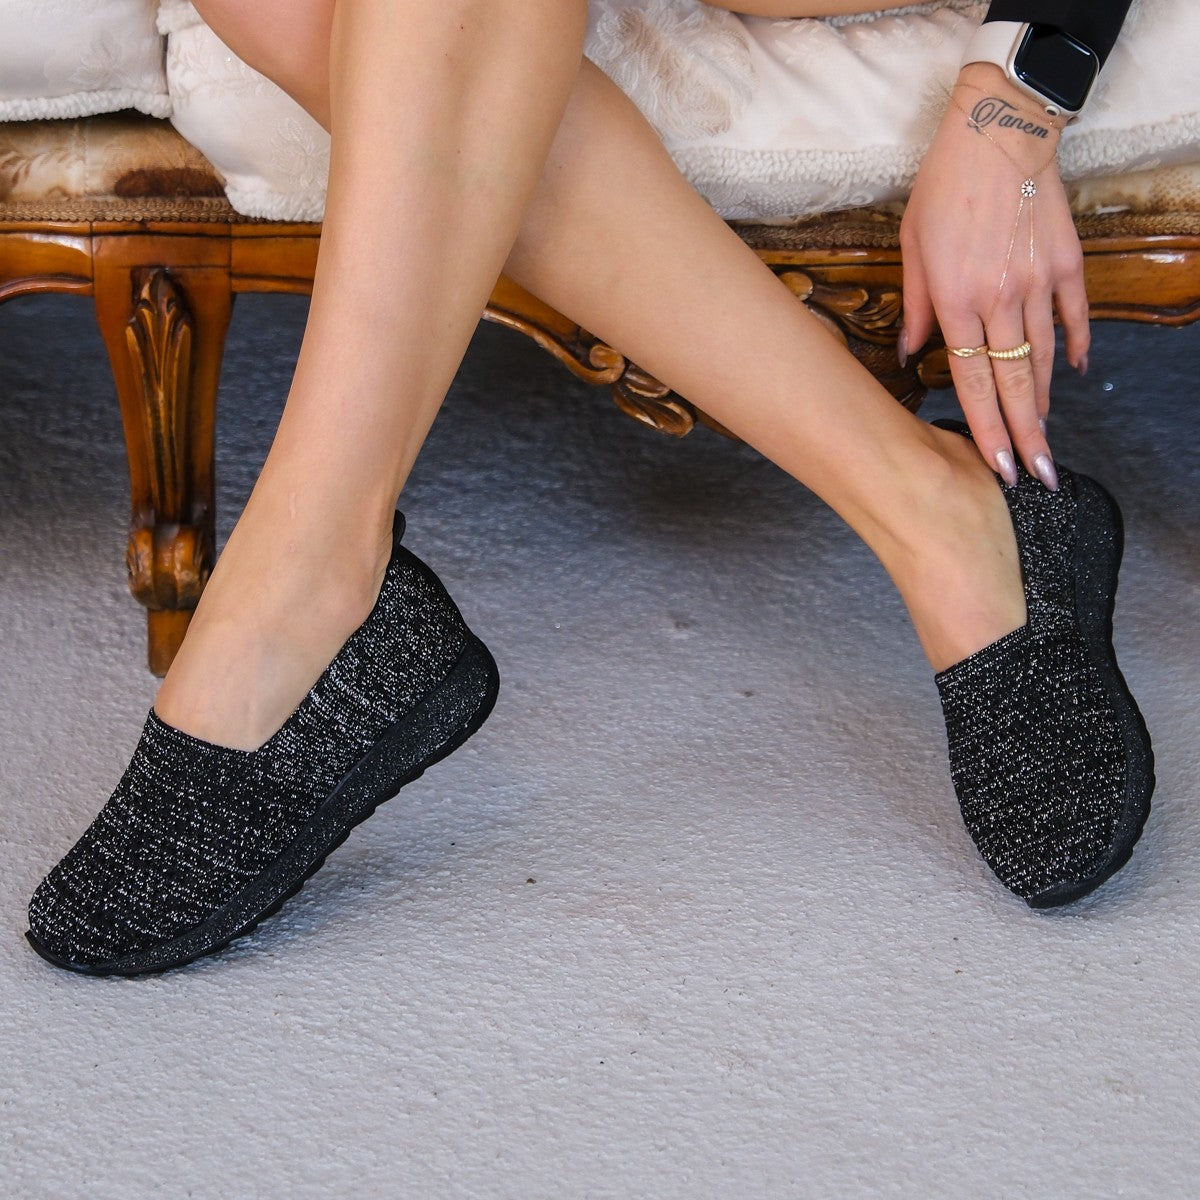 Nily Black Knitwear Flat Shoes - STREETMODE ™